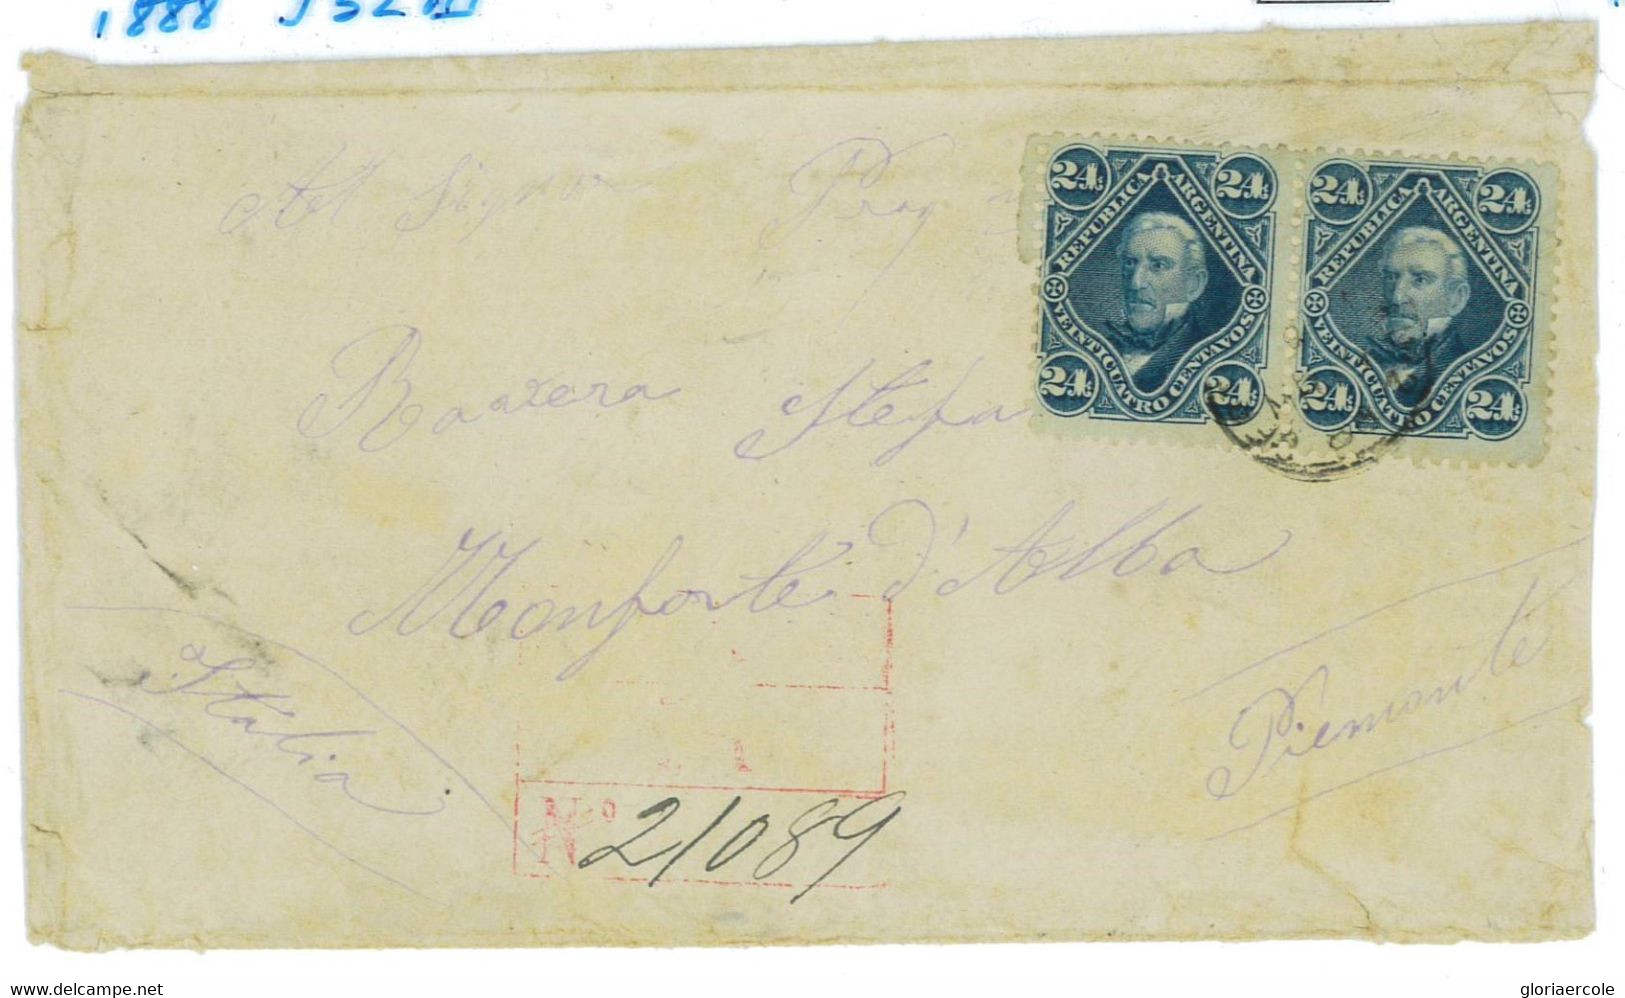 P0253 - ARGENTINA - POSTAL HISTORY - Jalil # 52 Pair - REGISTERED COVER  To ITALY  1888 - Storia Postale